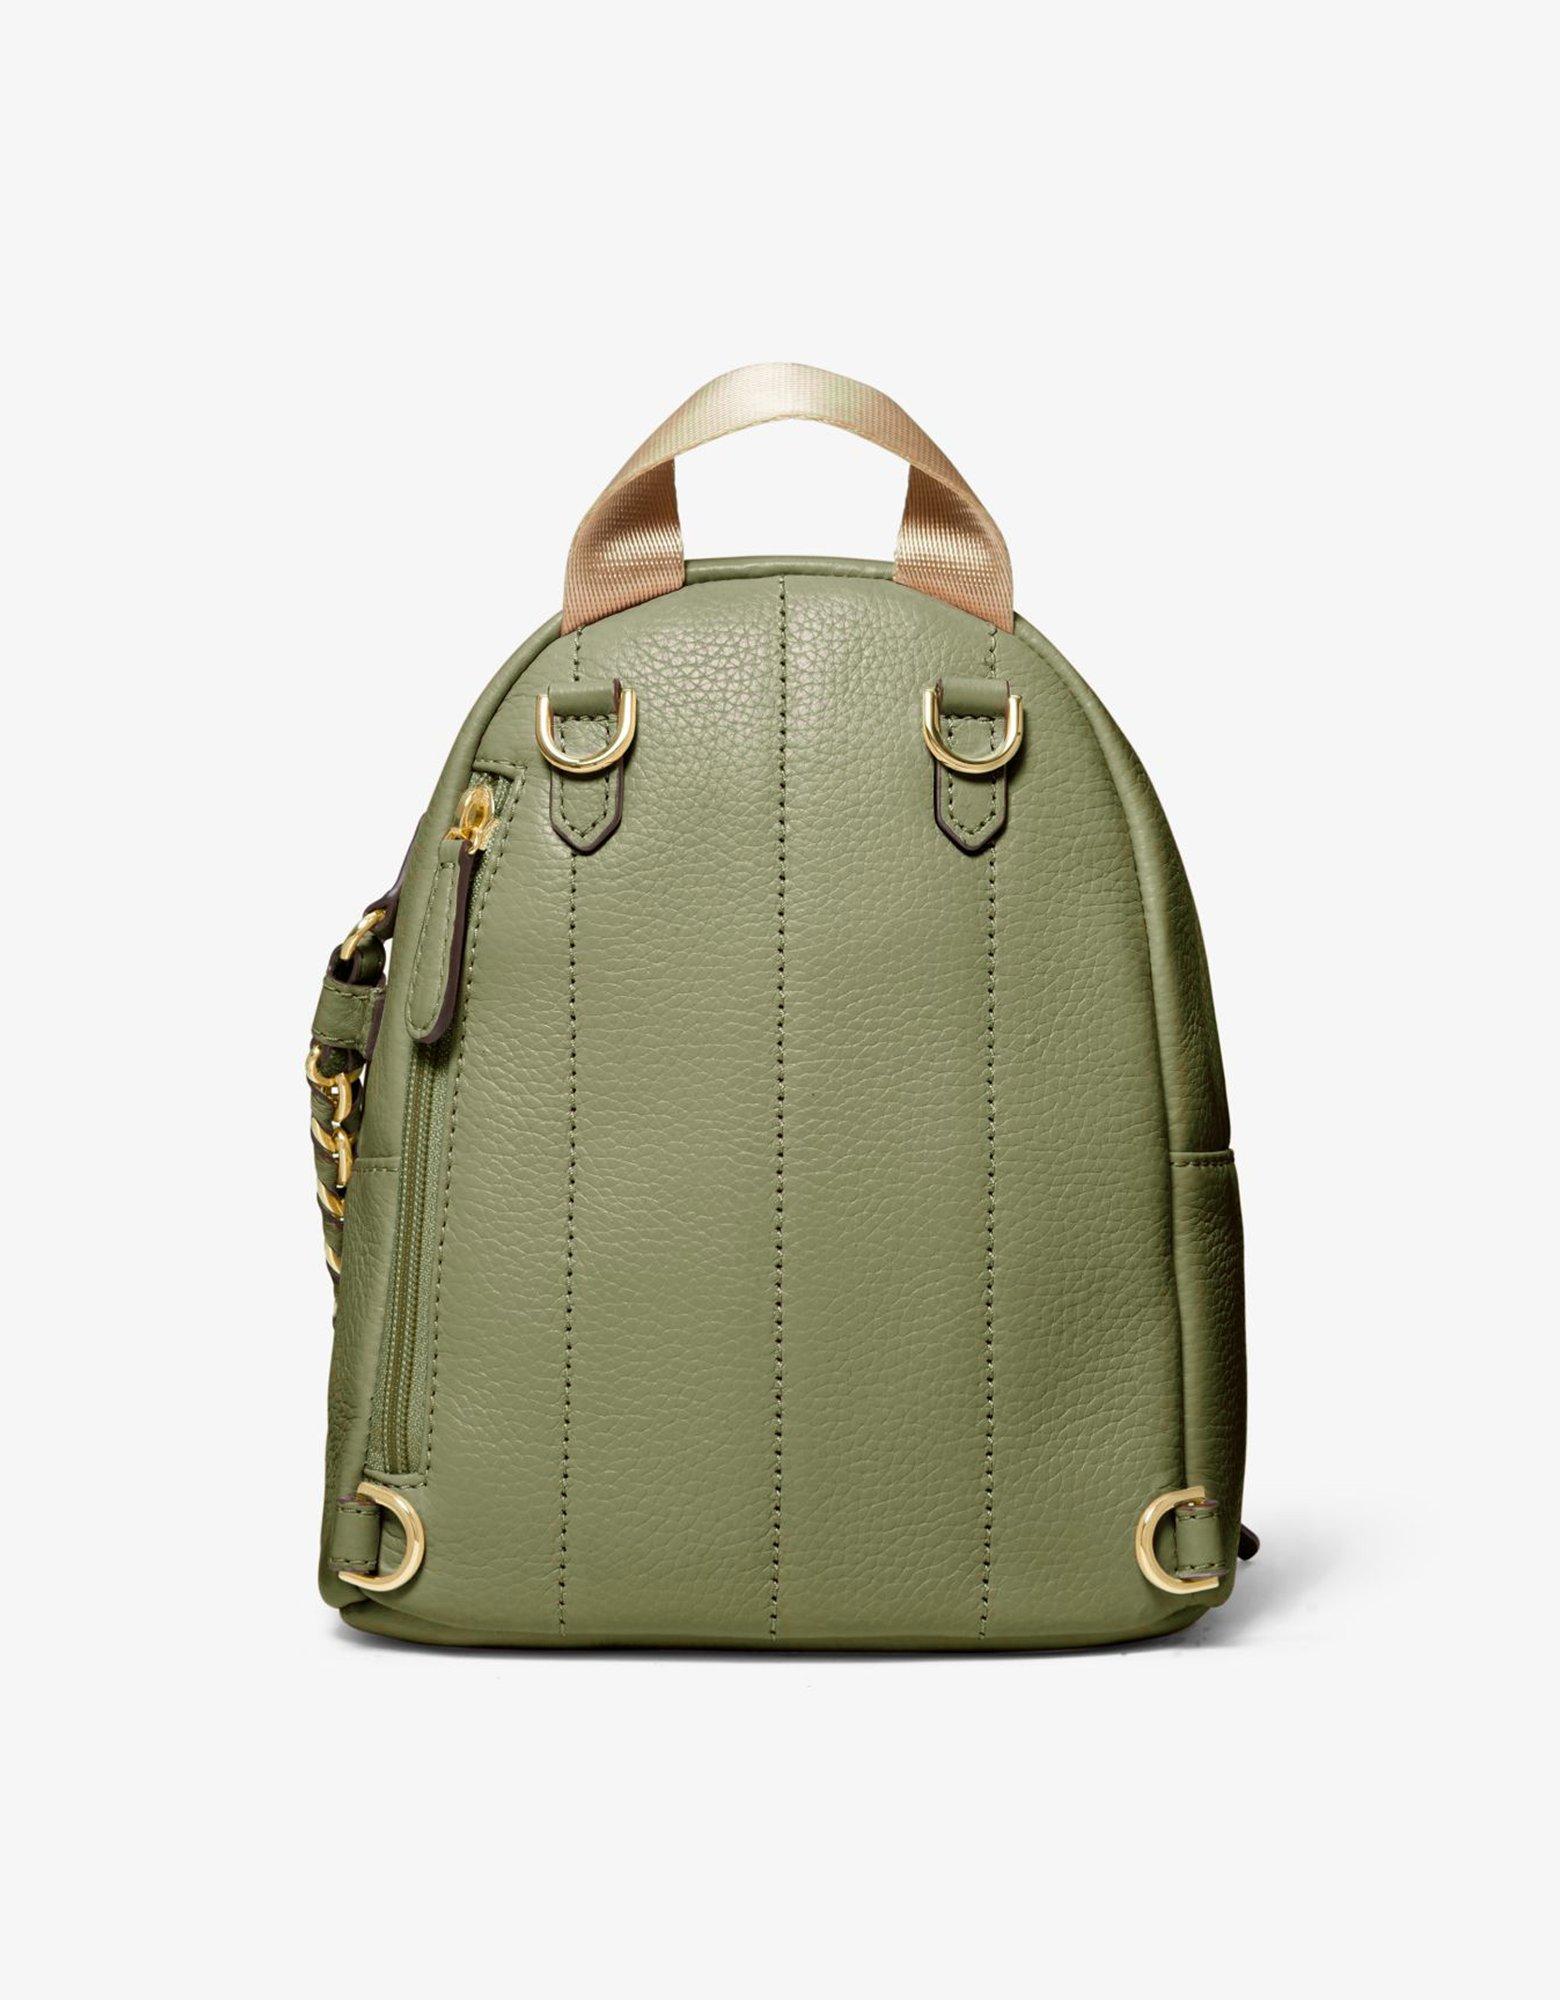 Michael Kors Green Slater Extra-Small Pebbled Leather Convertible